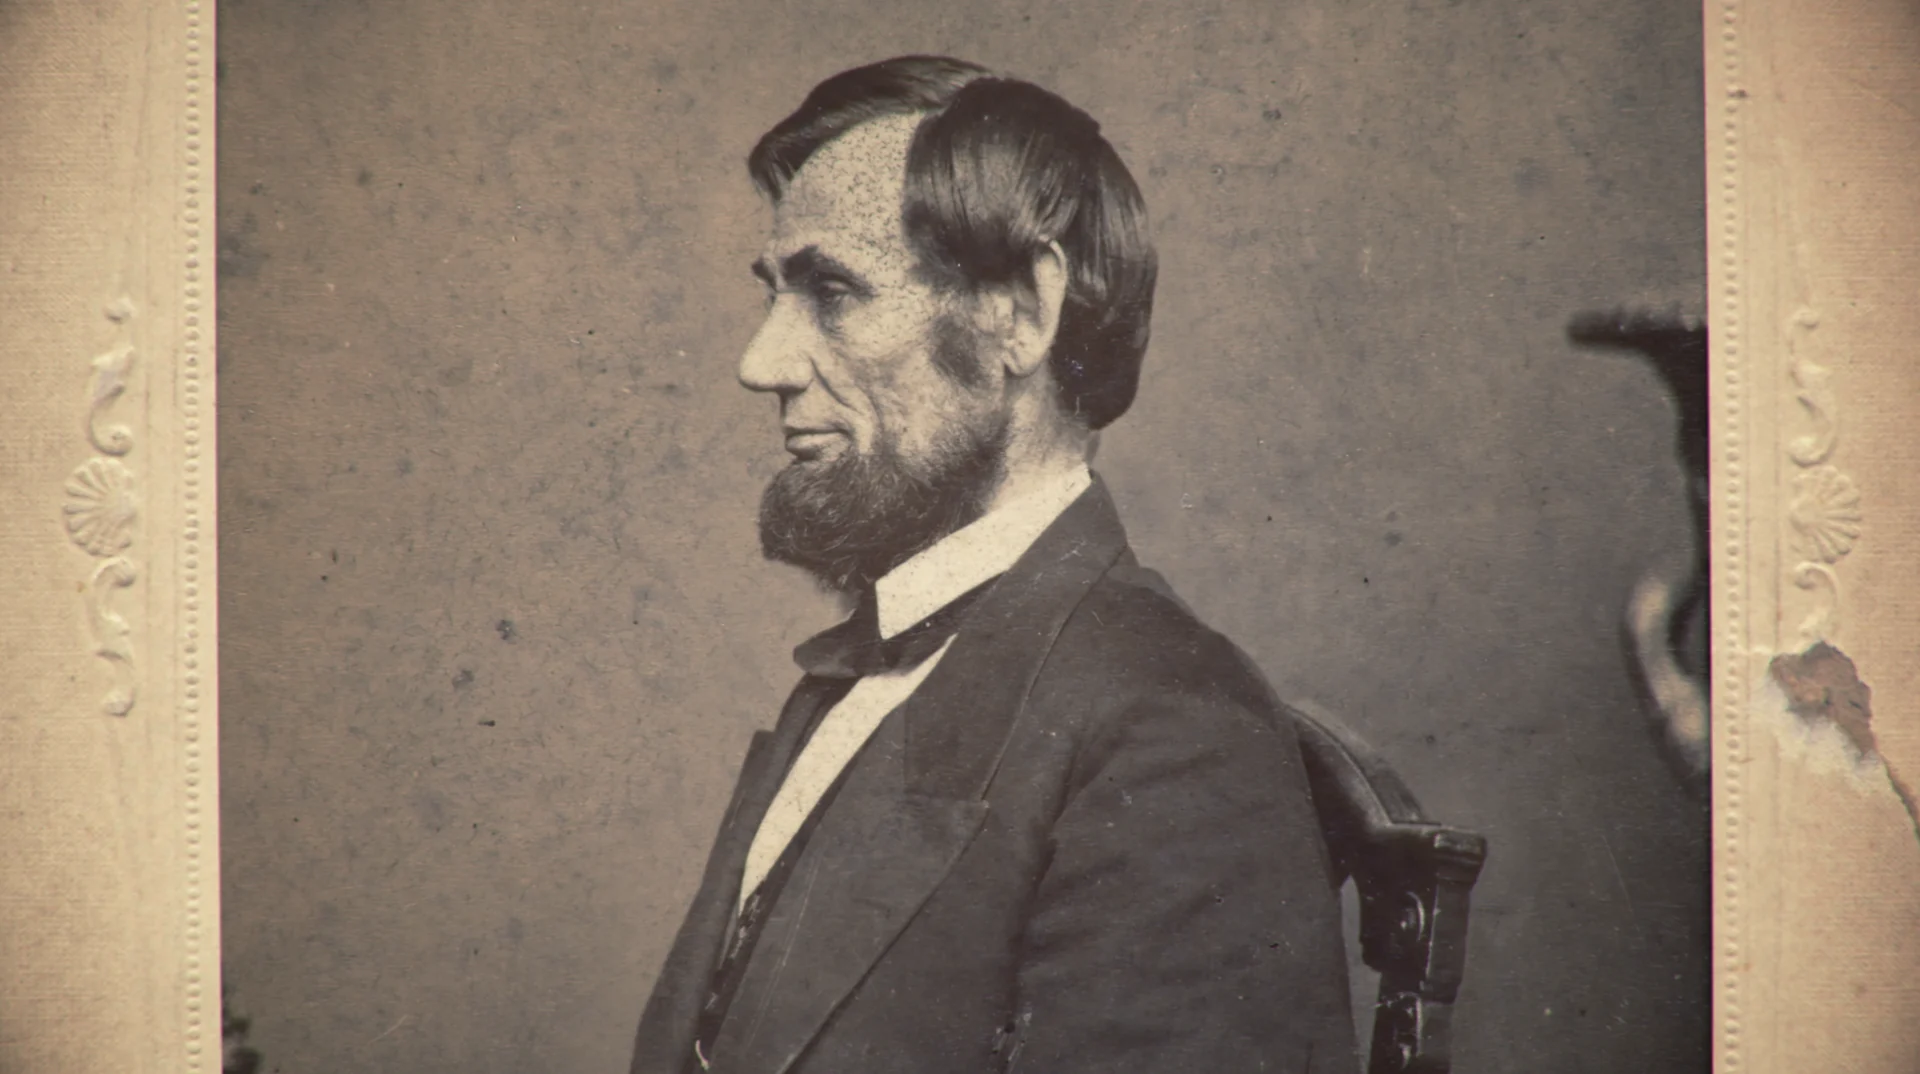 Our film design for The HISTORY Channel's 3-part documentary ‘Abraham Lincoln’ debuted over President's Day weekend. We worked methodically to have our design match the era the 16th president lived in-- recreating and treating vintage portraits as well as creating photo-real maps to enhance the visual narrative of the film. 